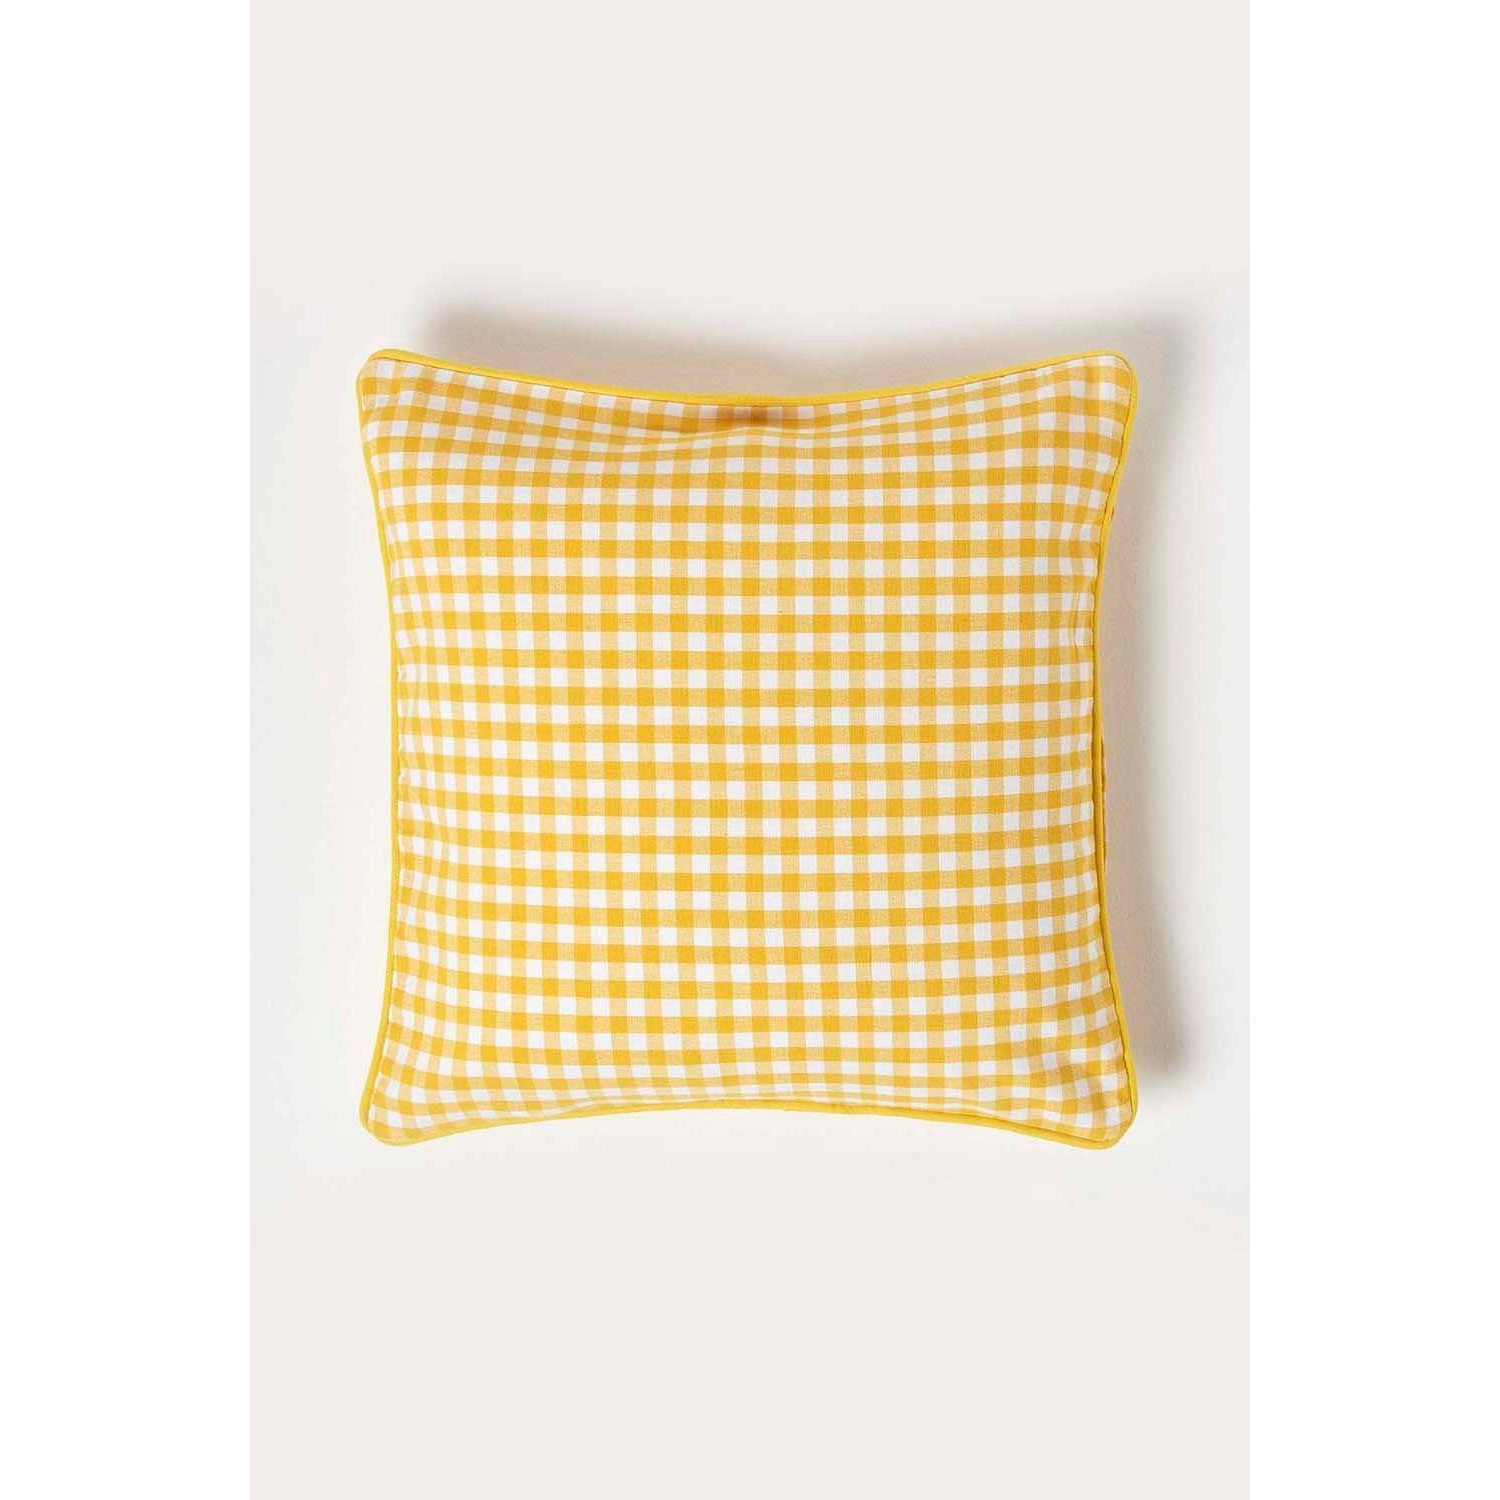 Cotton Gingham Check Cushion Cover - image 1